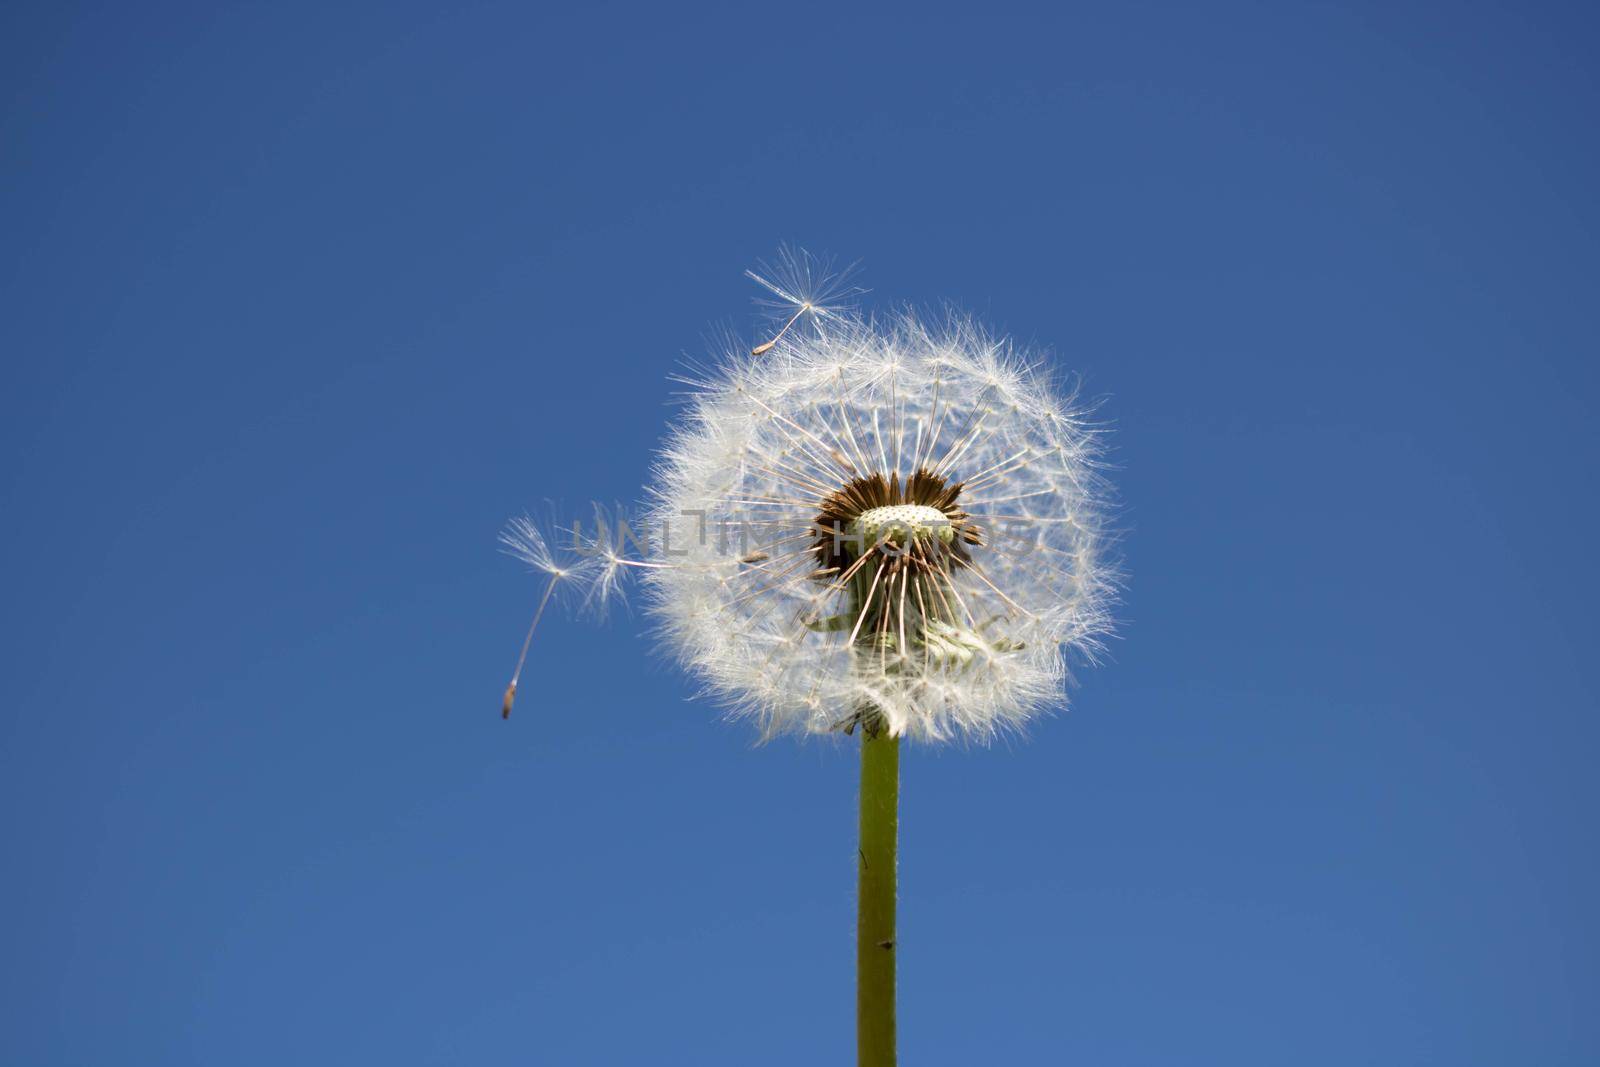 A dandelion with seeds blown away by the wind across a clear blue sky by lapushka62